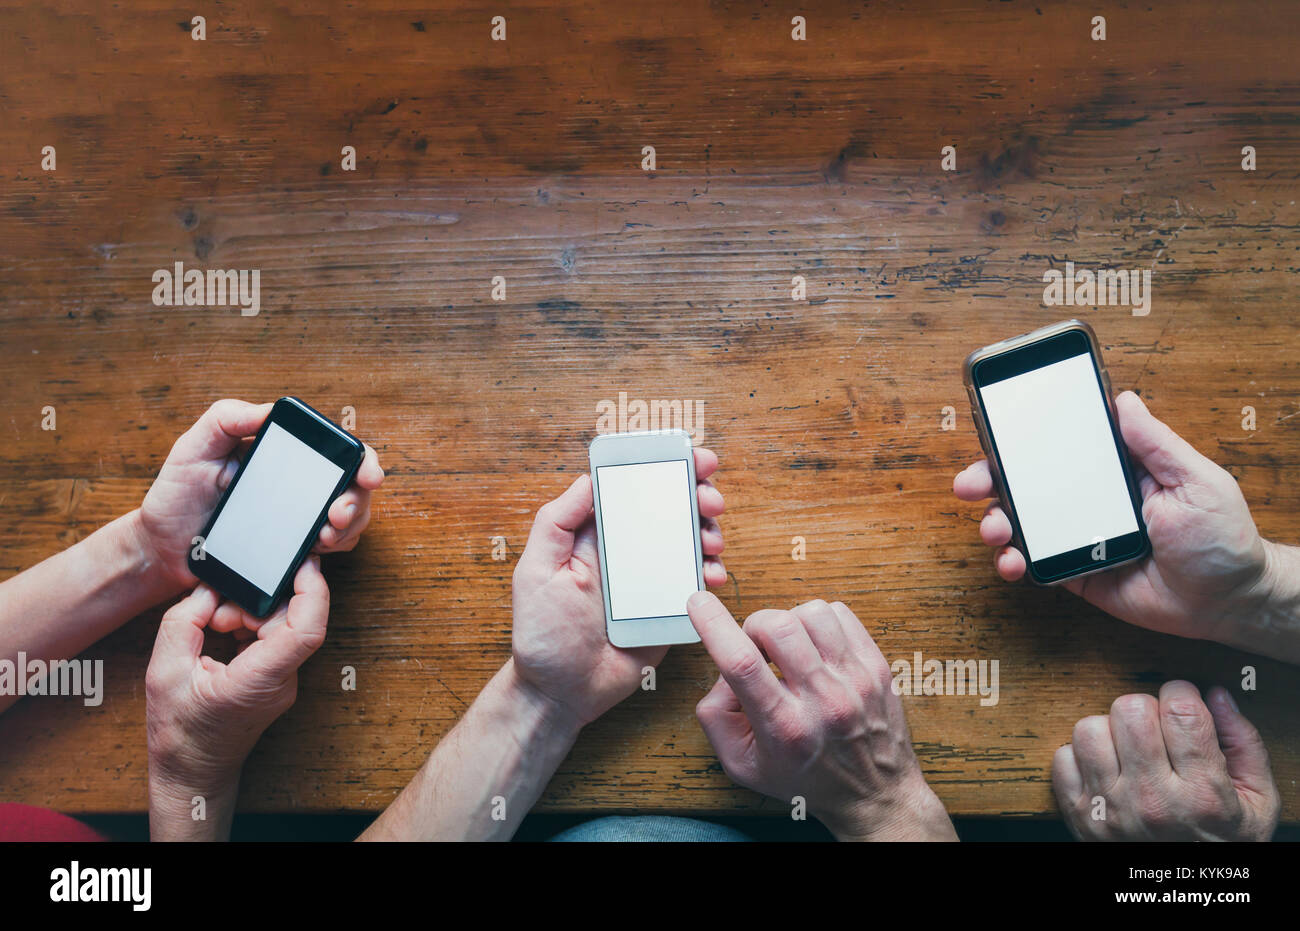 social networking concept, many hands with smartphones gadgets on wooden background Stock Photo